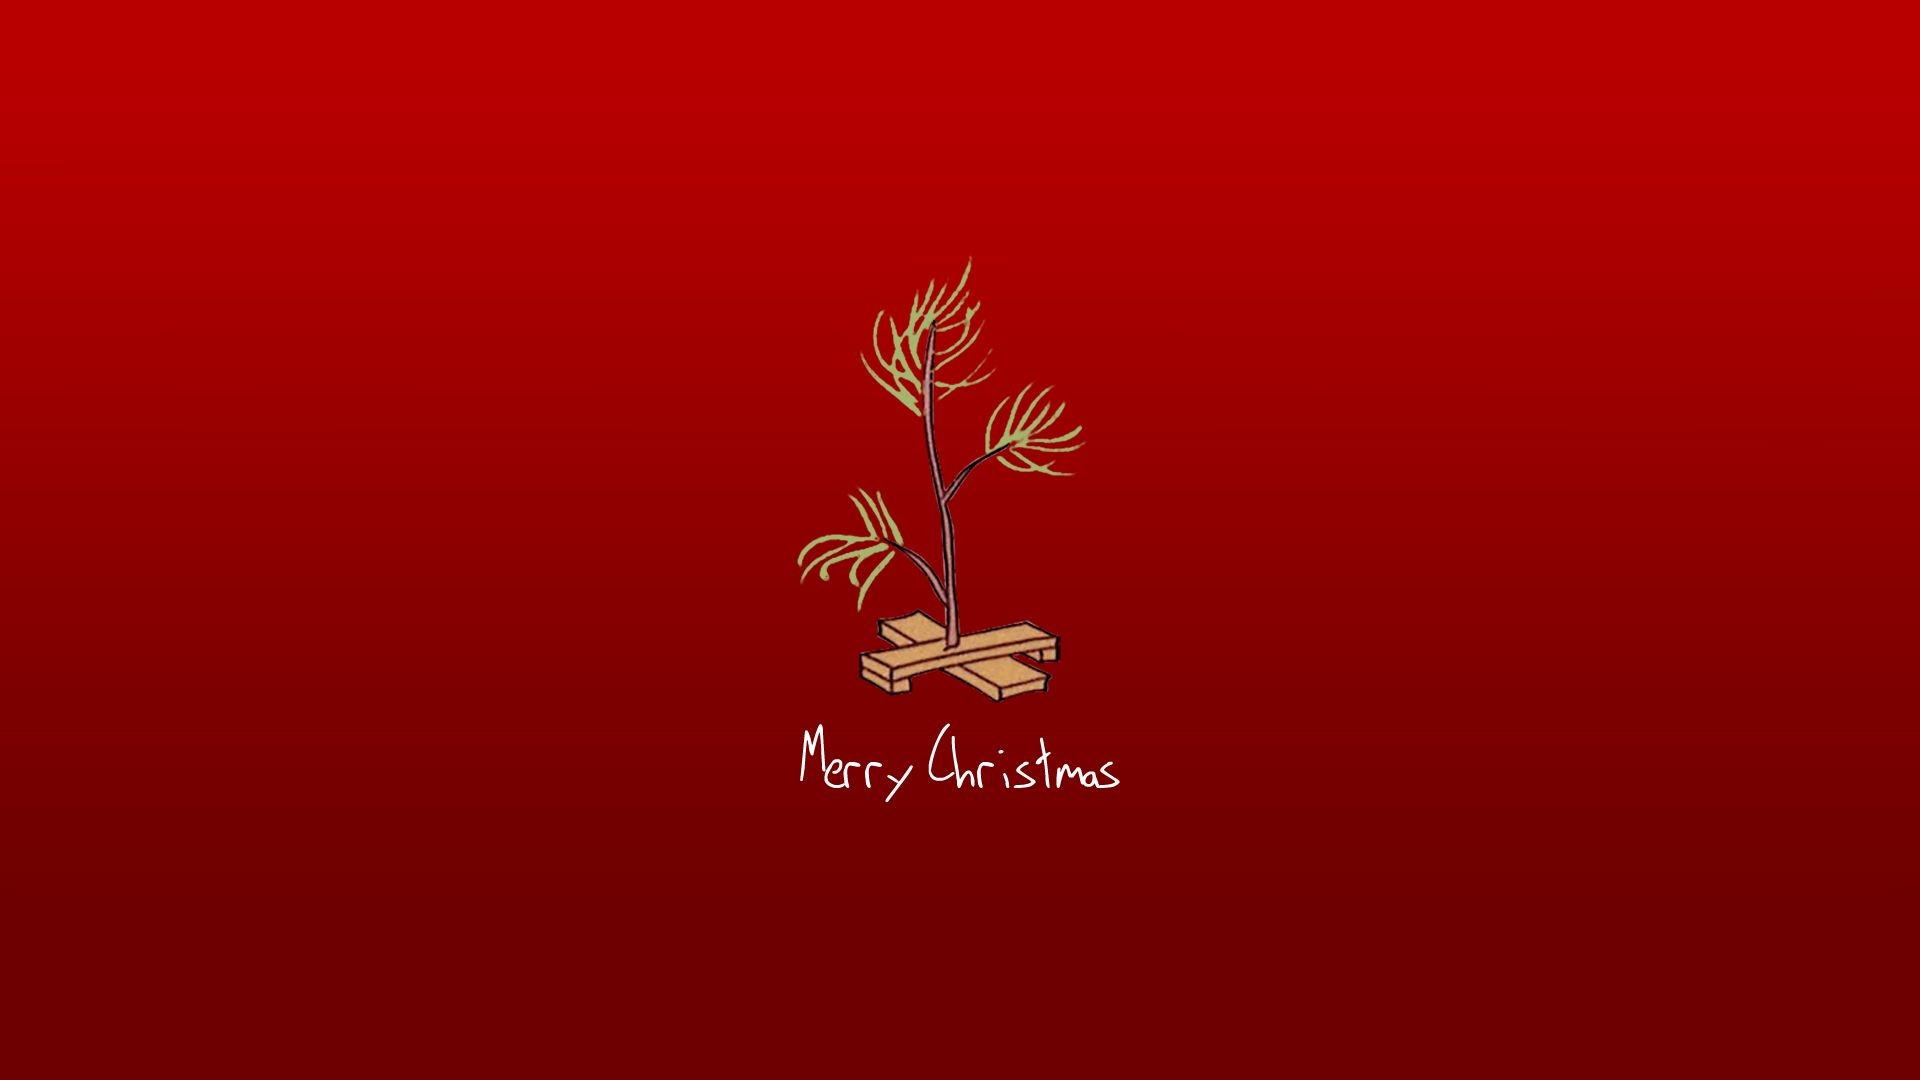 1920x1080 Charlie Brown Christmas Backgrounds - Wallpaper Cave